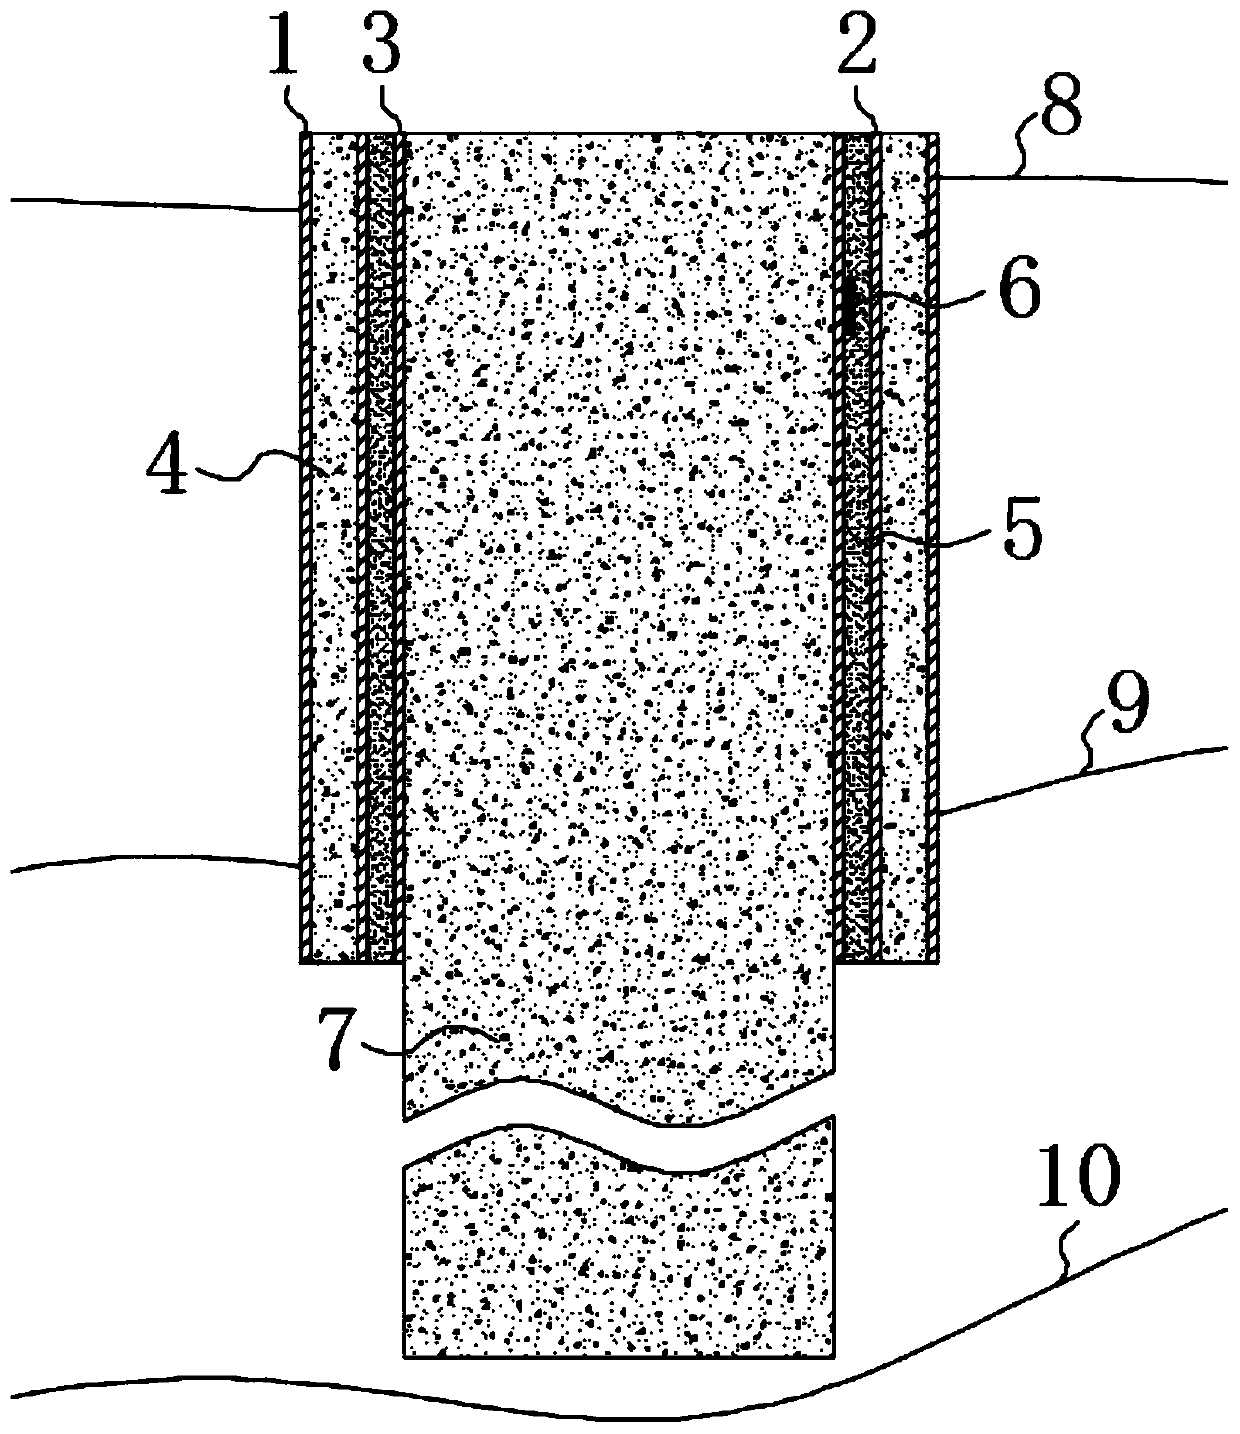 Structure for limiting horizontal displacement of pile foundation in deformable body rock stratum and construction method